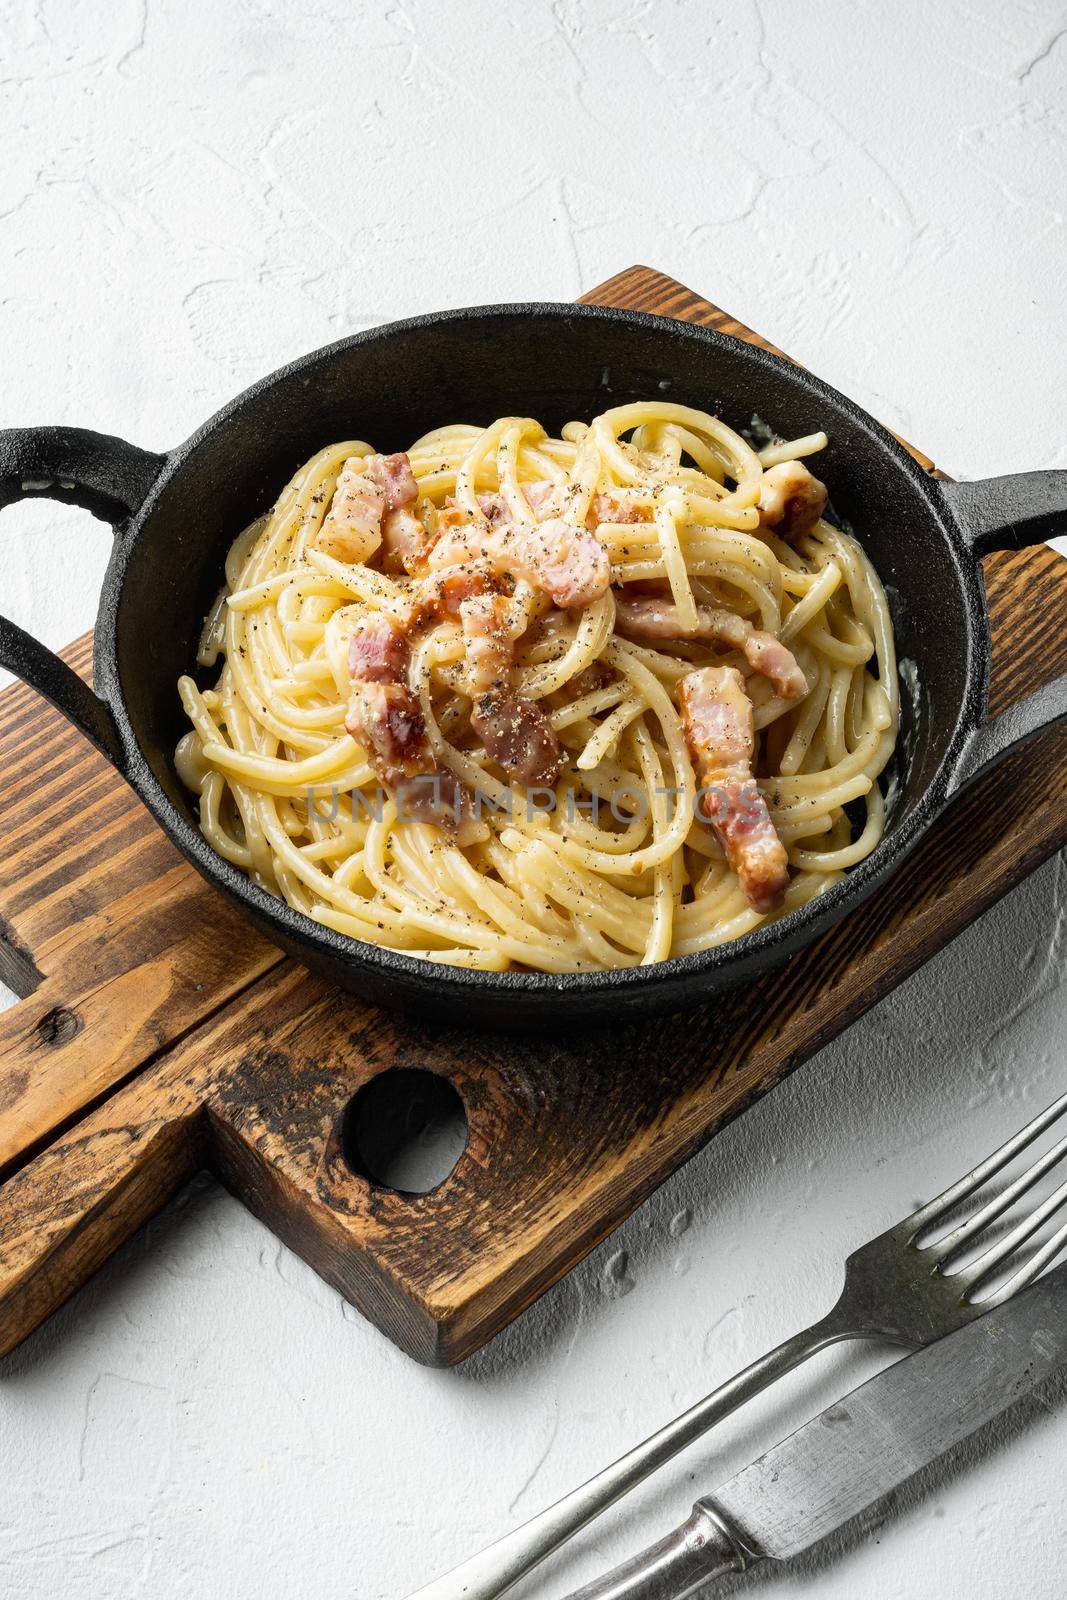 Classic Homemade Pasta carbonara Italian with Bacon, eggs, Parmesan Cheese set, in cast iron frying pan, on white stone surface